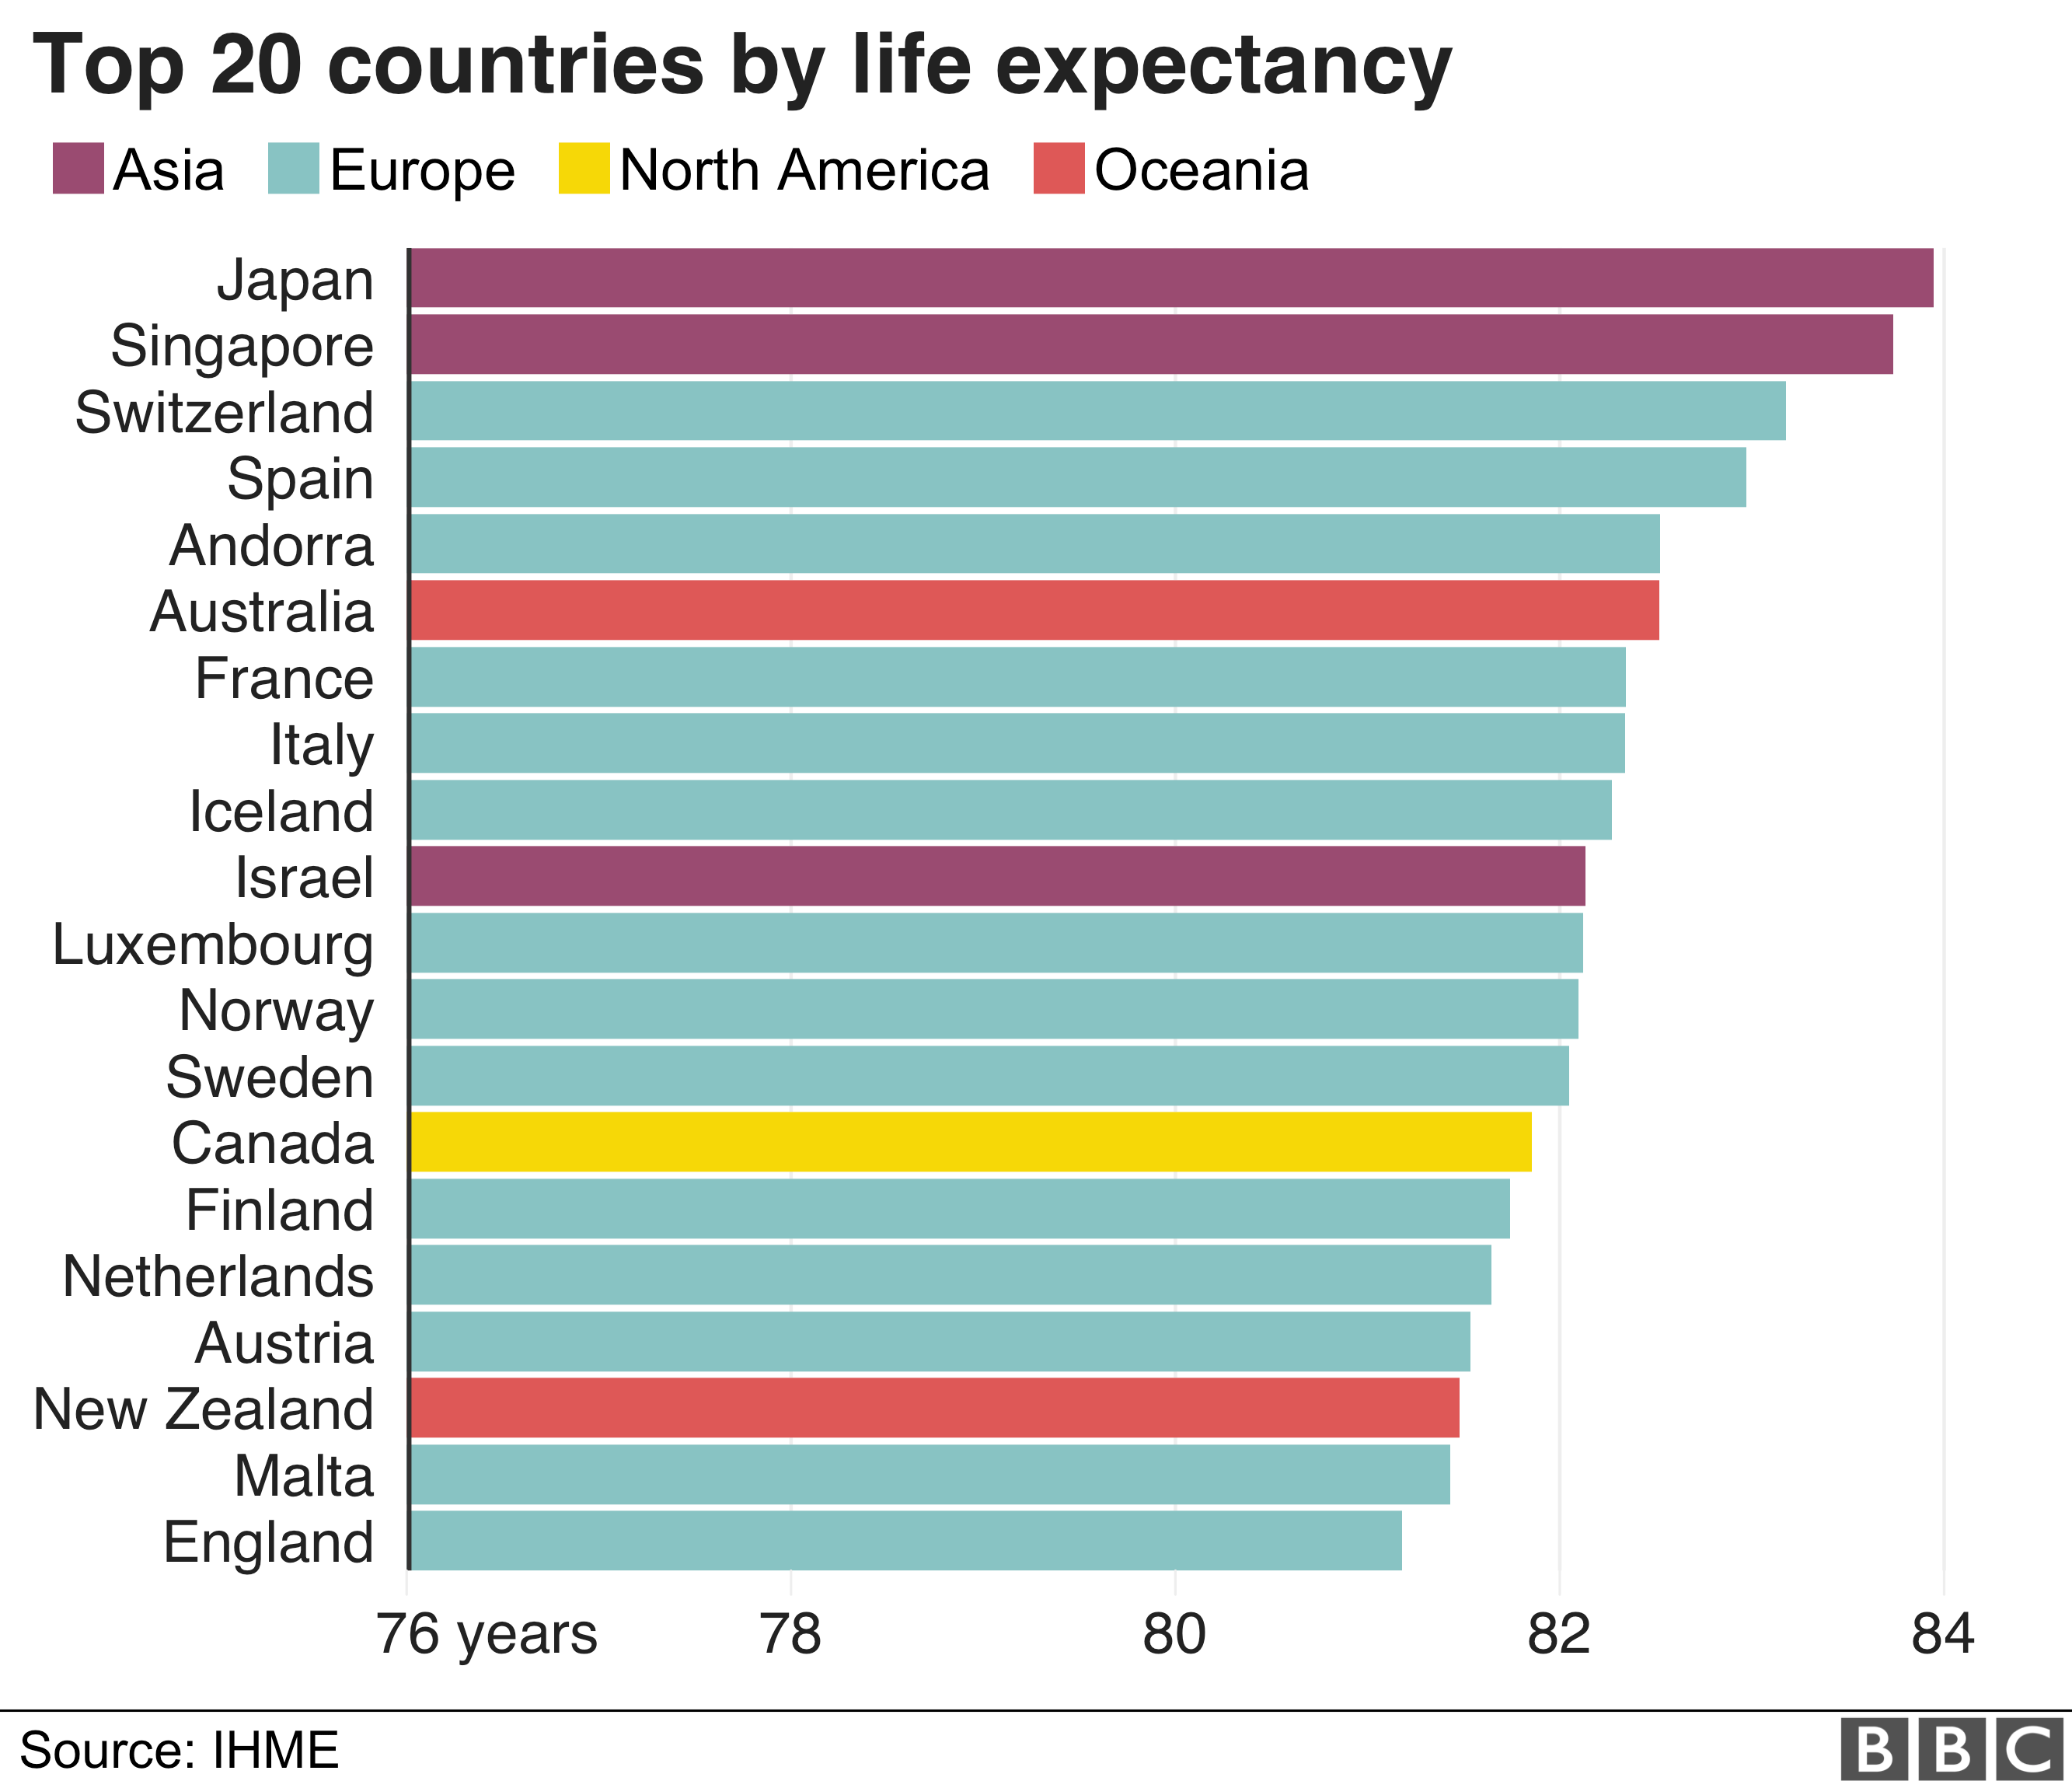 The top 20 countries in terms of life expectancy are mostly Western European countries